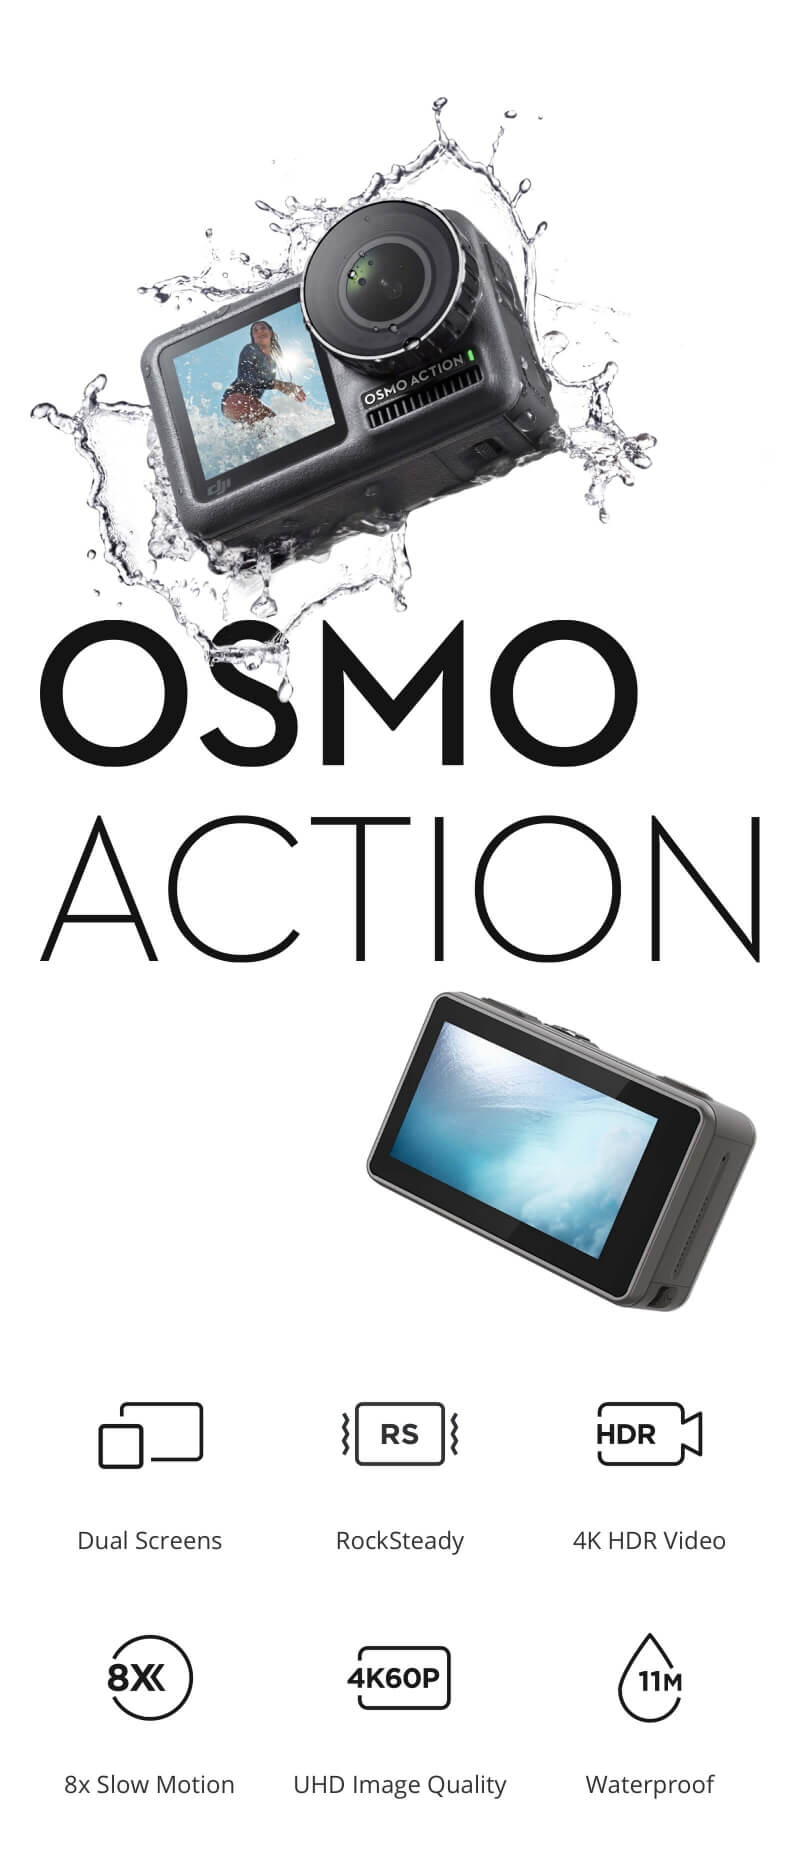 DJI Osmo Action is a 4K action camera with dual displays